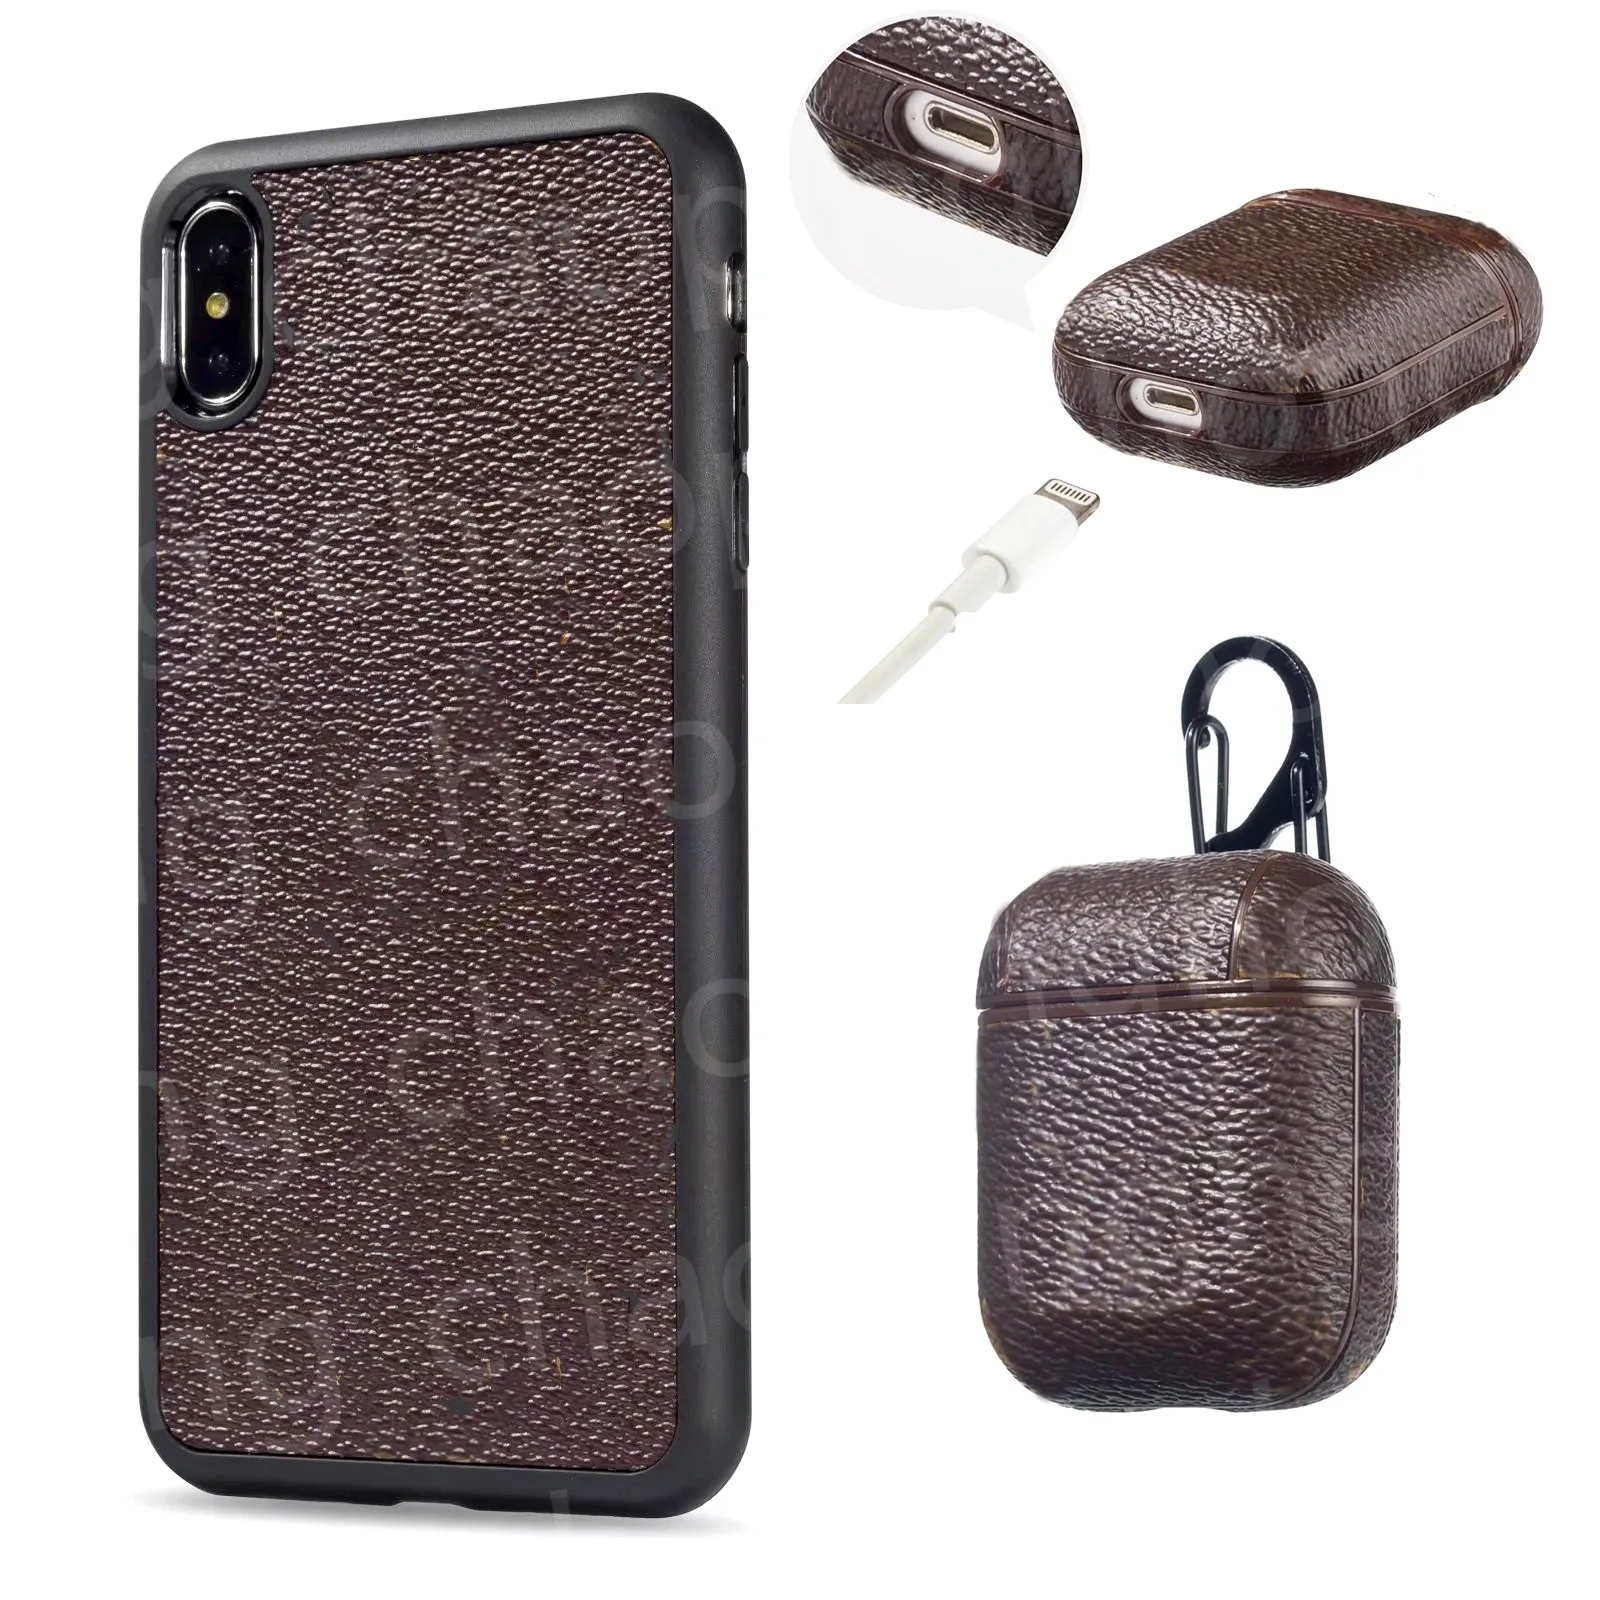 Fashion Phone Cases voor iPhone 13 Promax I 12 11 XS XR XSMAX 8 7 Plus Mobiele Shell Luxe Designer Oortelefoon Pakket Airpods 3e Generatie Nieuwe 2021 Air Pods Pro 2 3 4 Cover